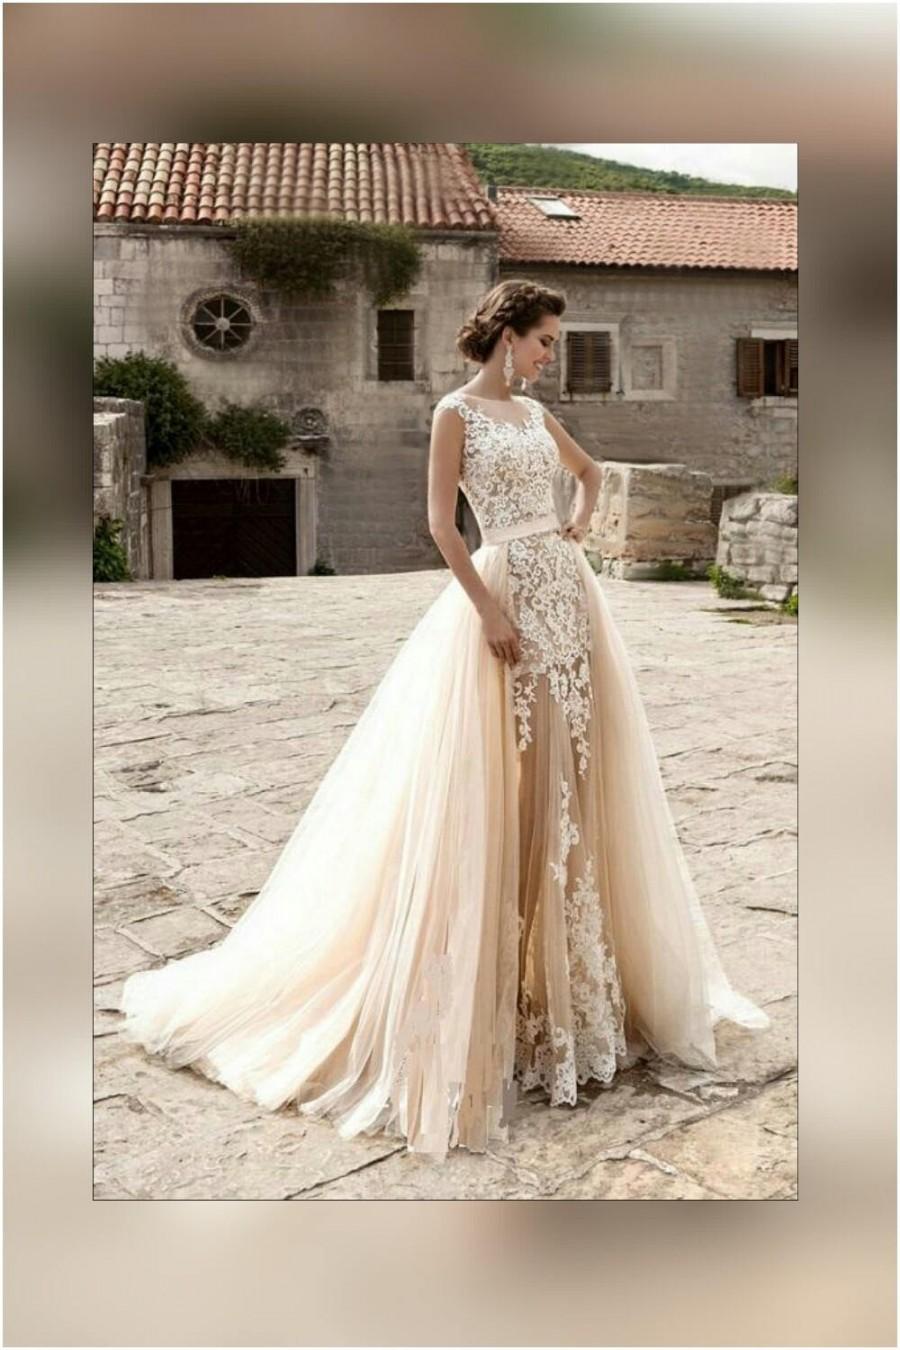 Mariage - Wedding dress light Peach Echo and white colors with detachable train, tulle bridal removable skirt with train